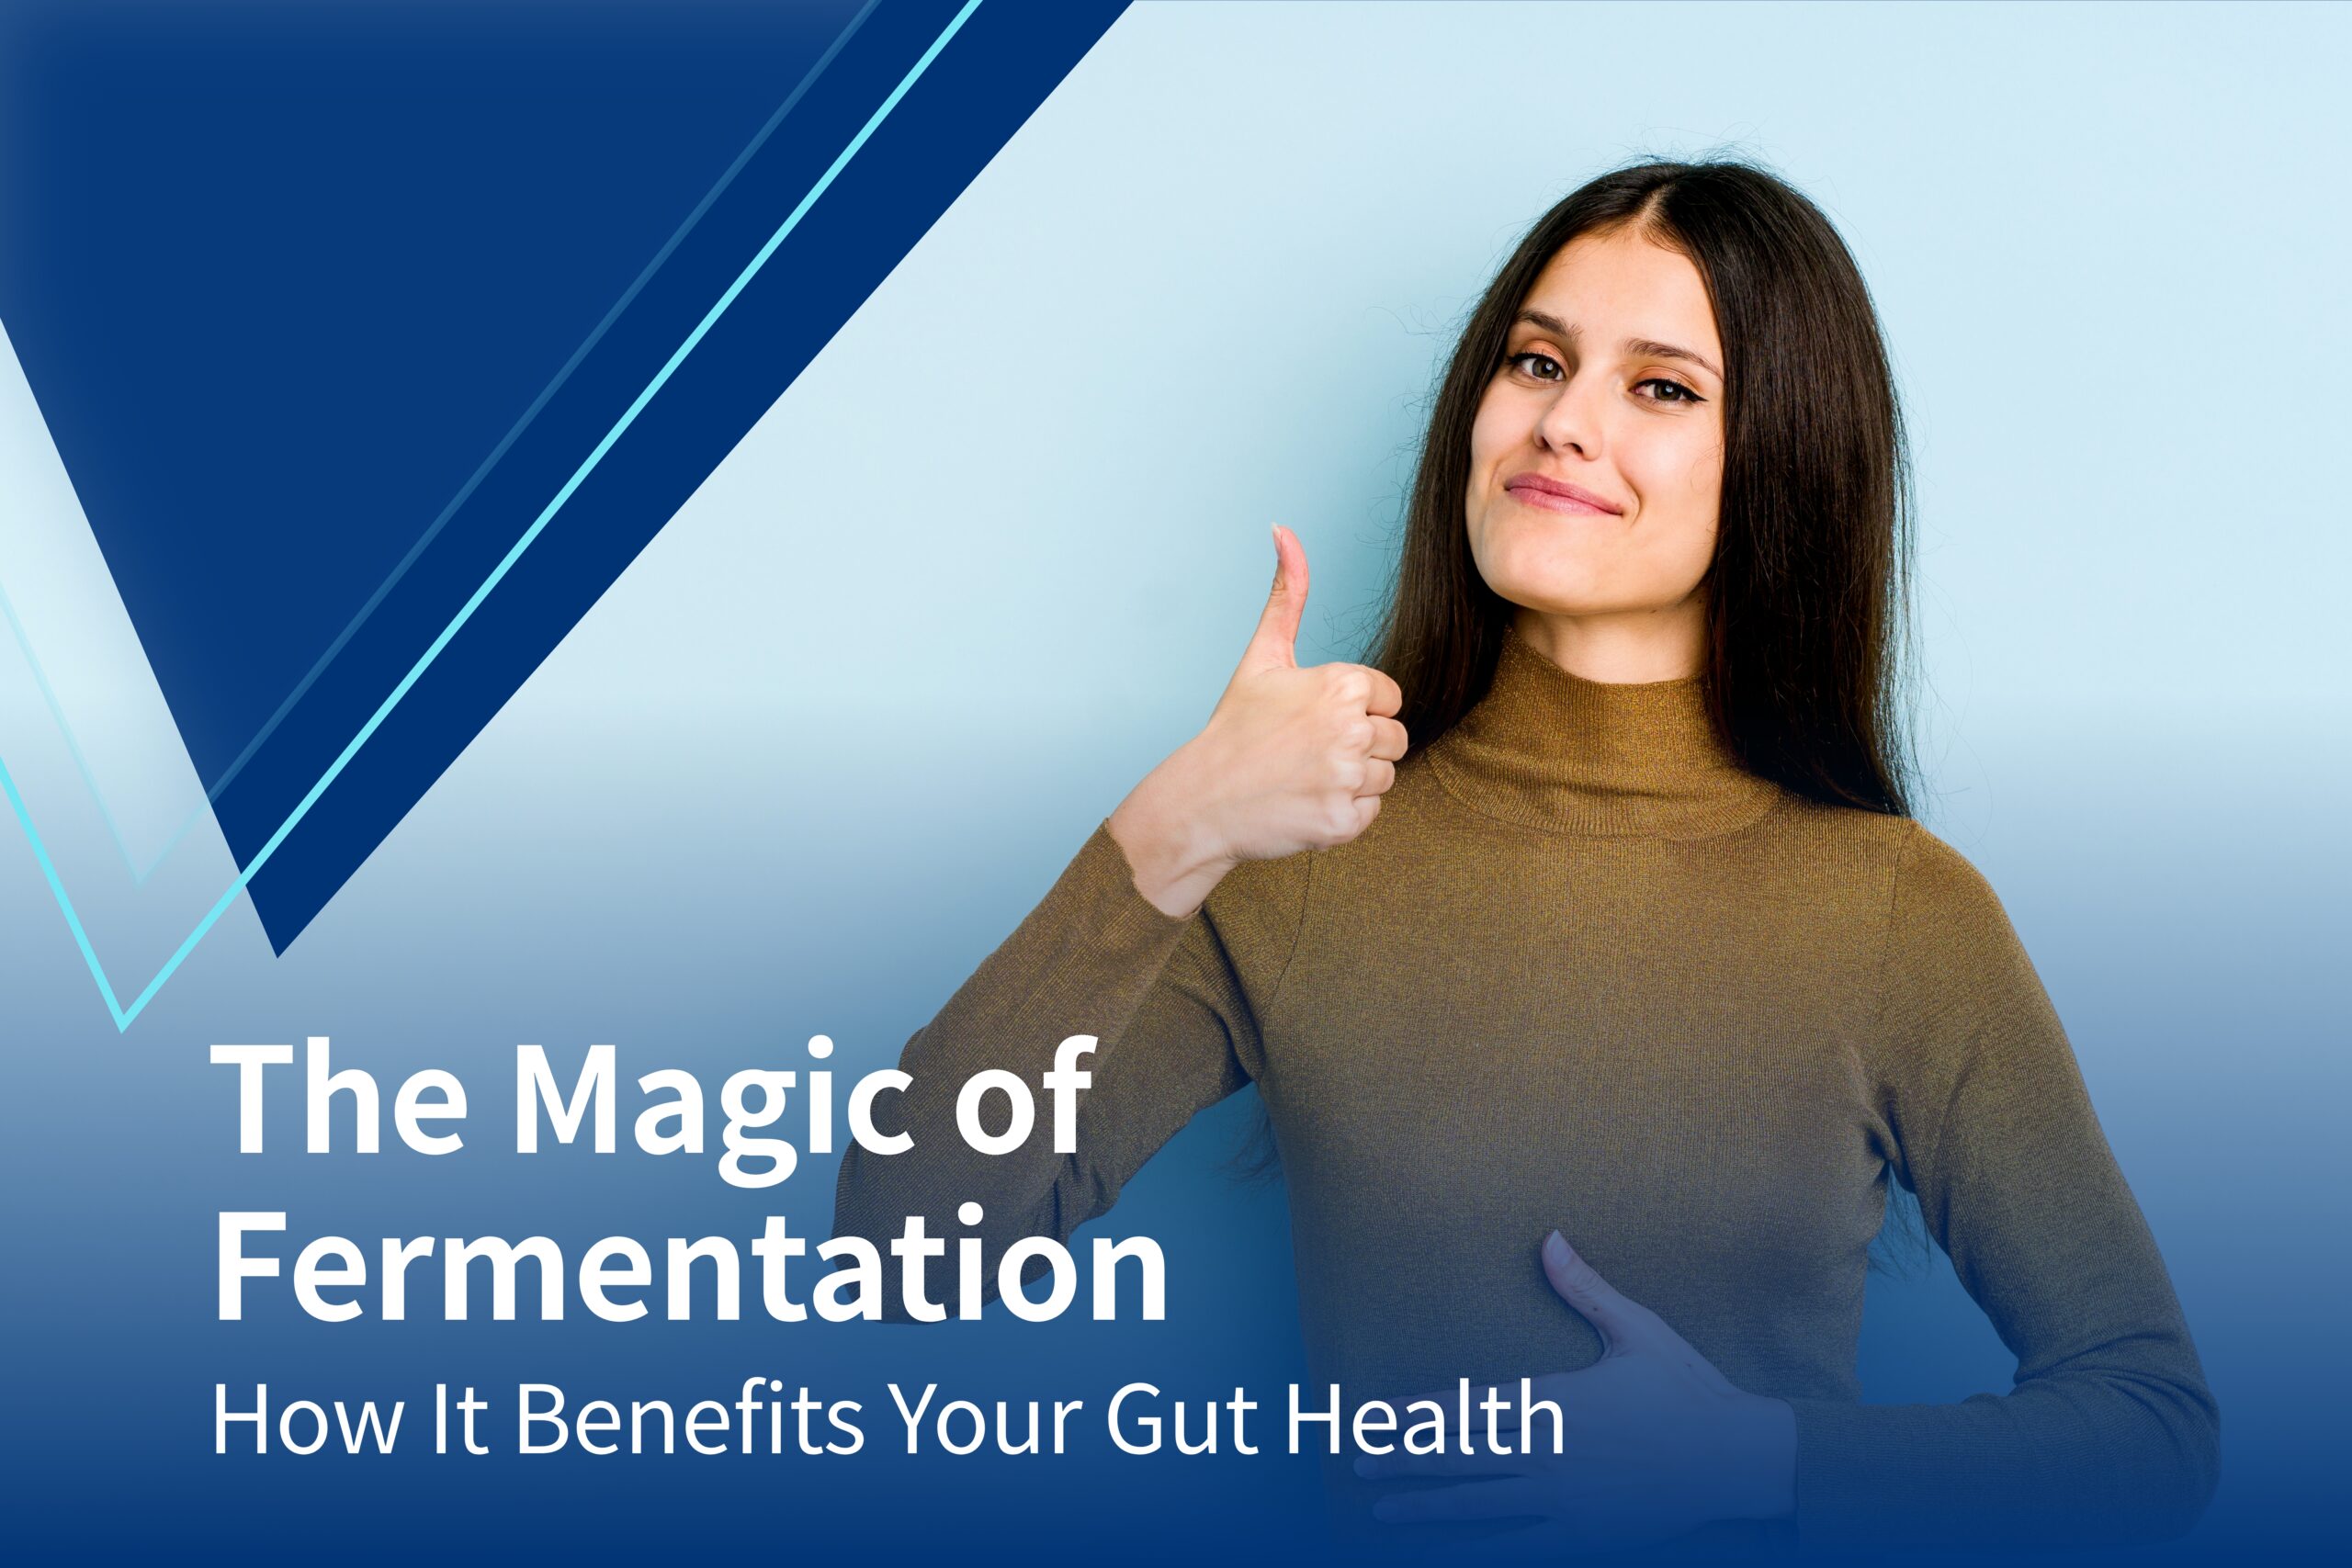 The Magic of Fermentation: How It Benefits Your Gut Health